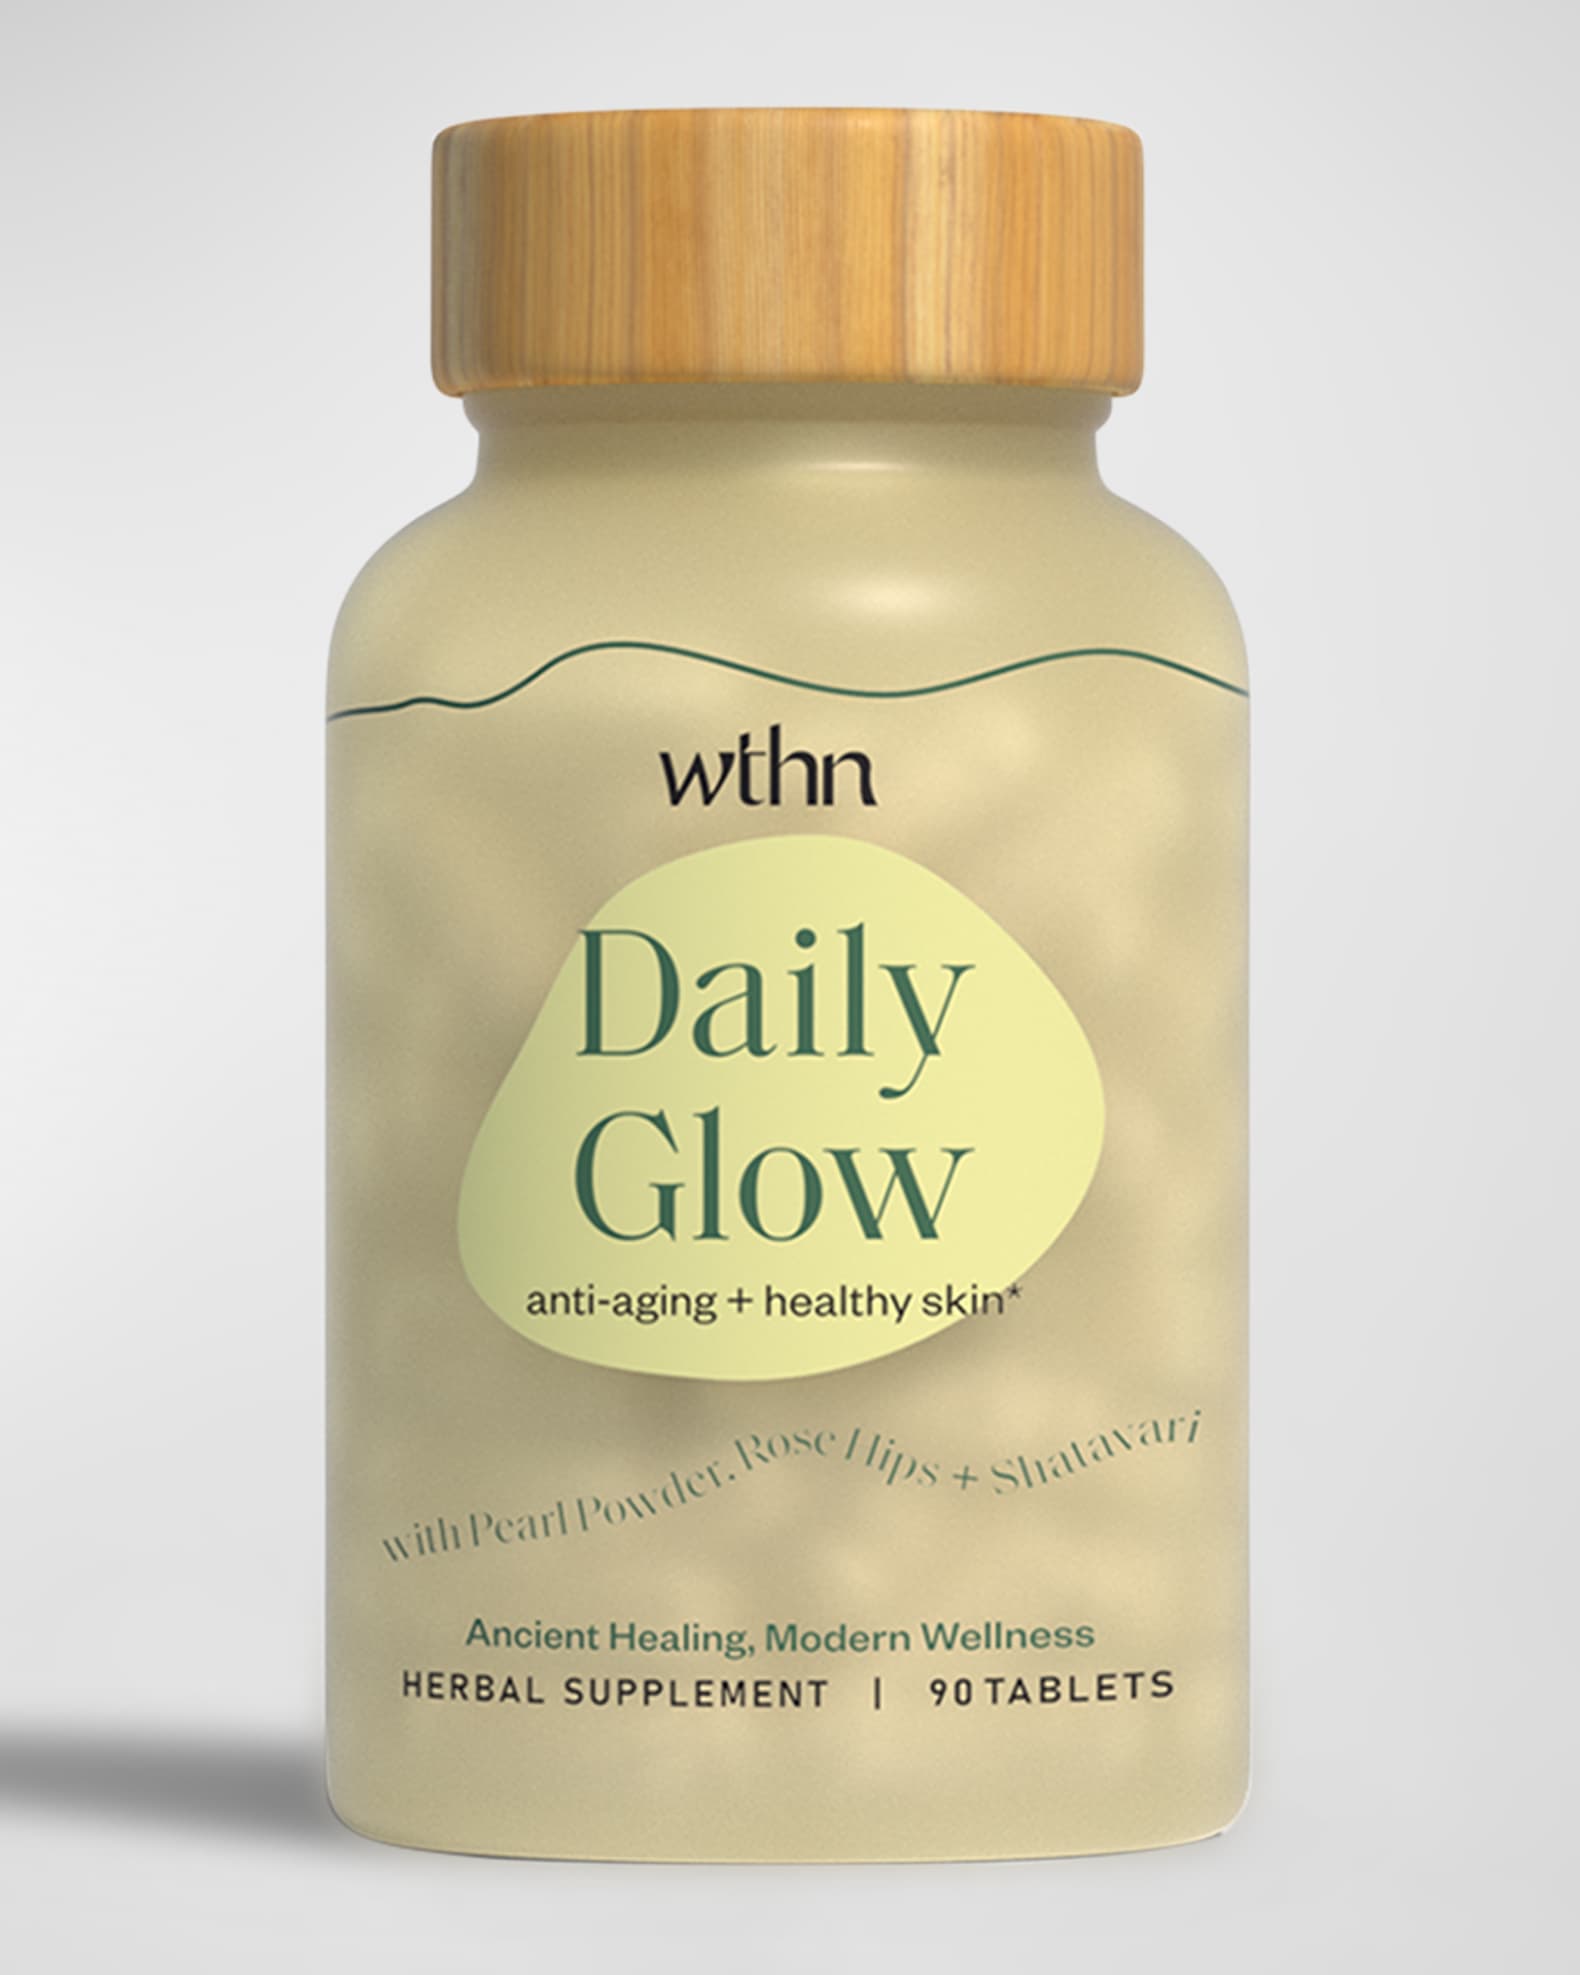 WTHN Daily Glow - For Anti-Aging + Healthy Skin